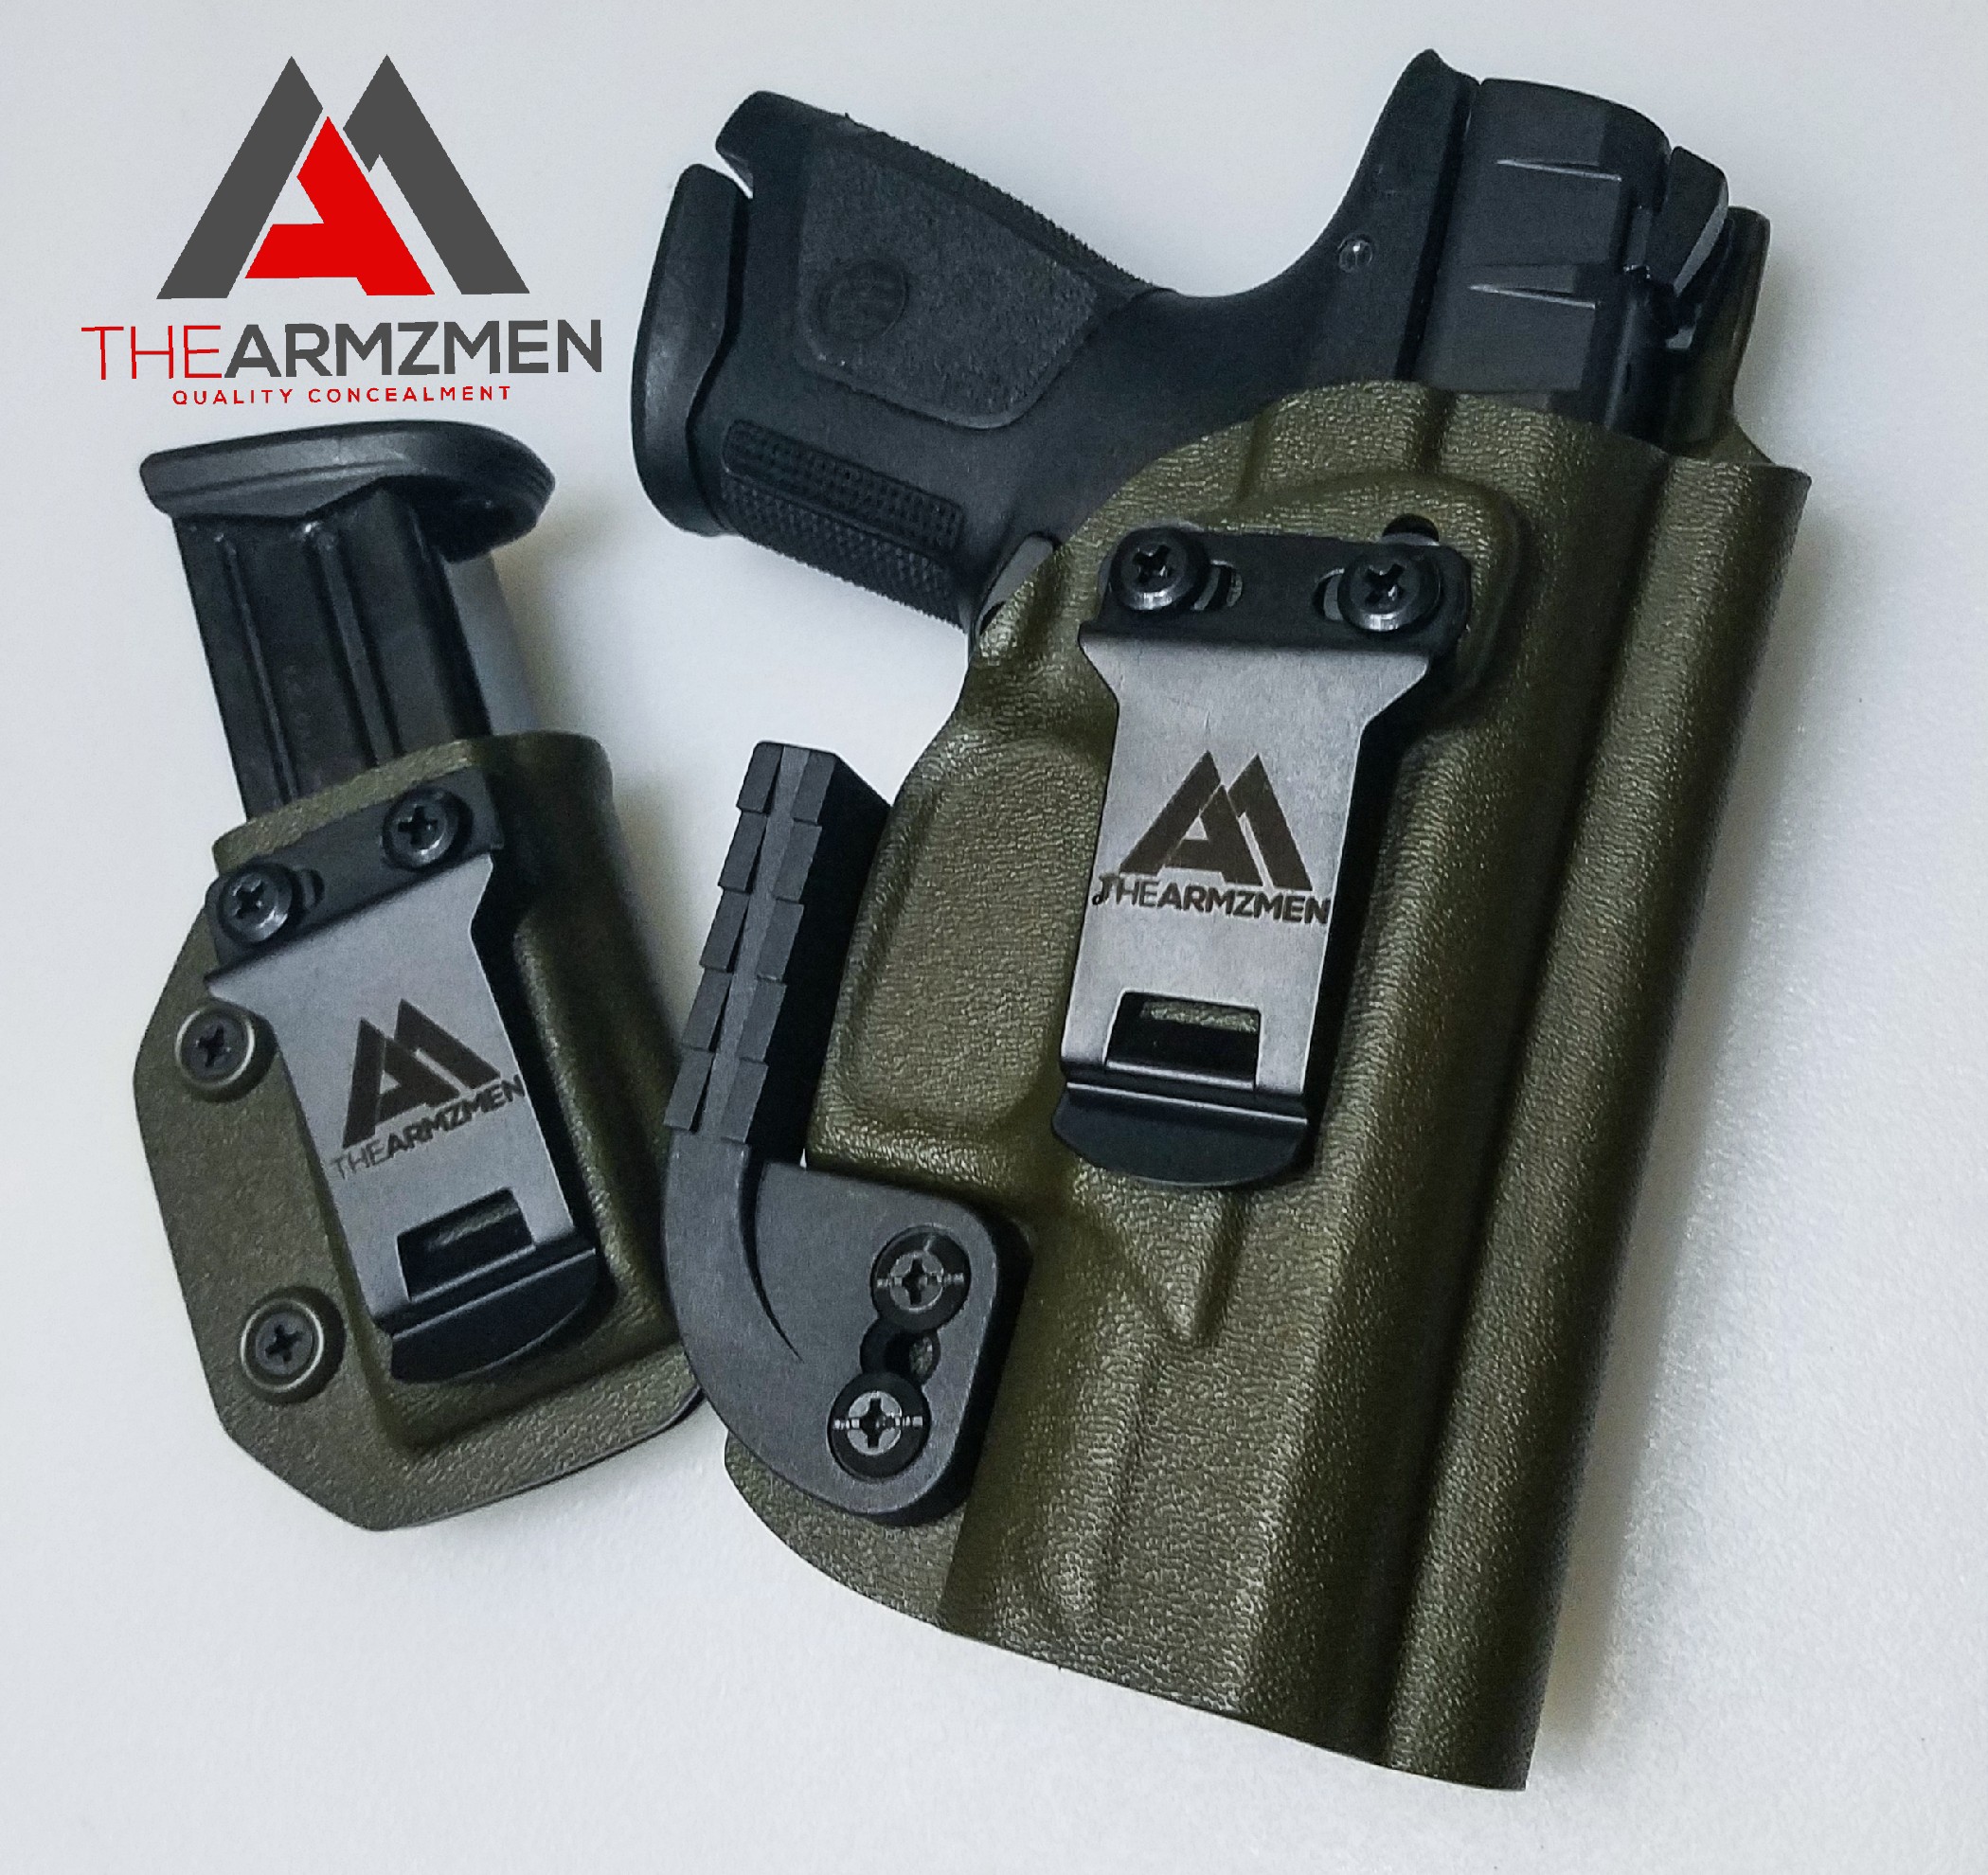 Armzmen Mag Combo For FN509 with PL mini2